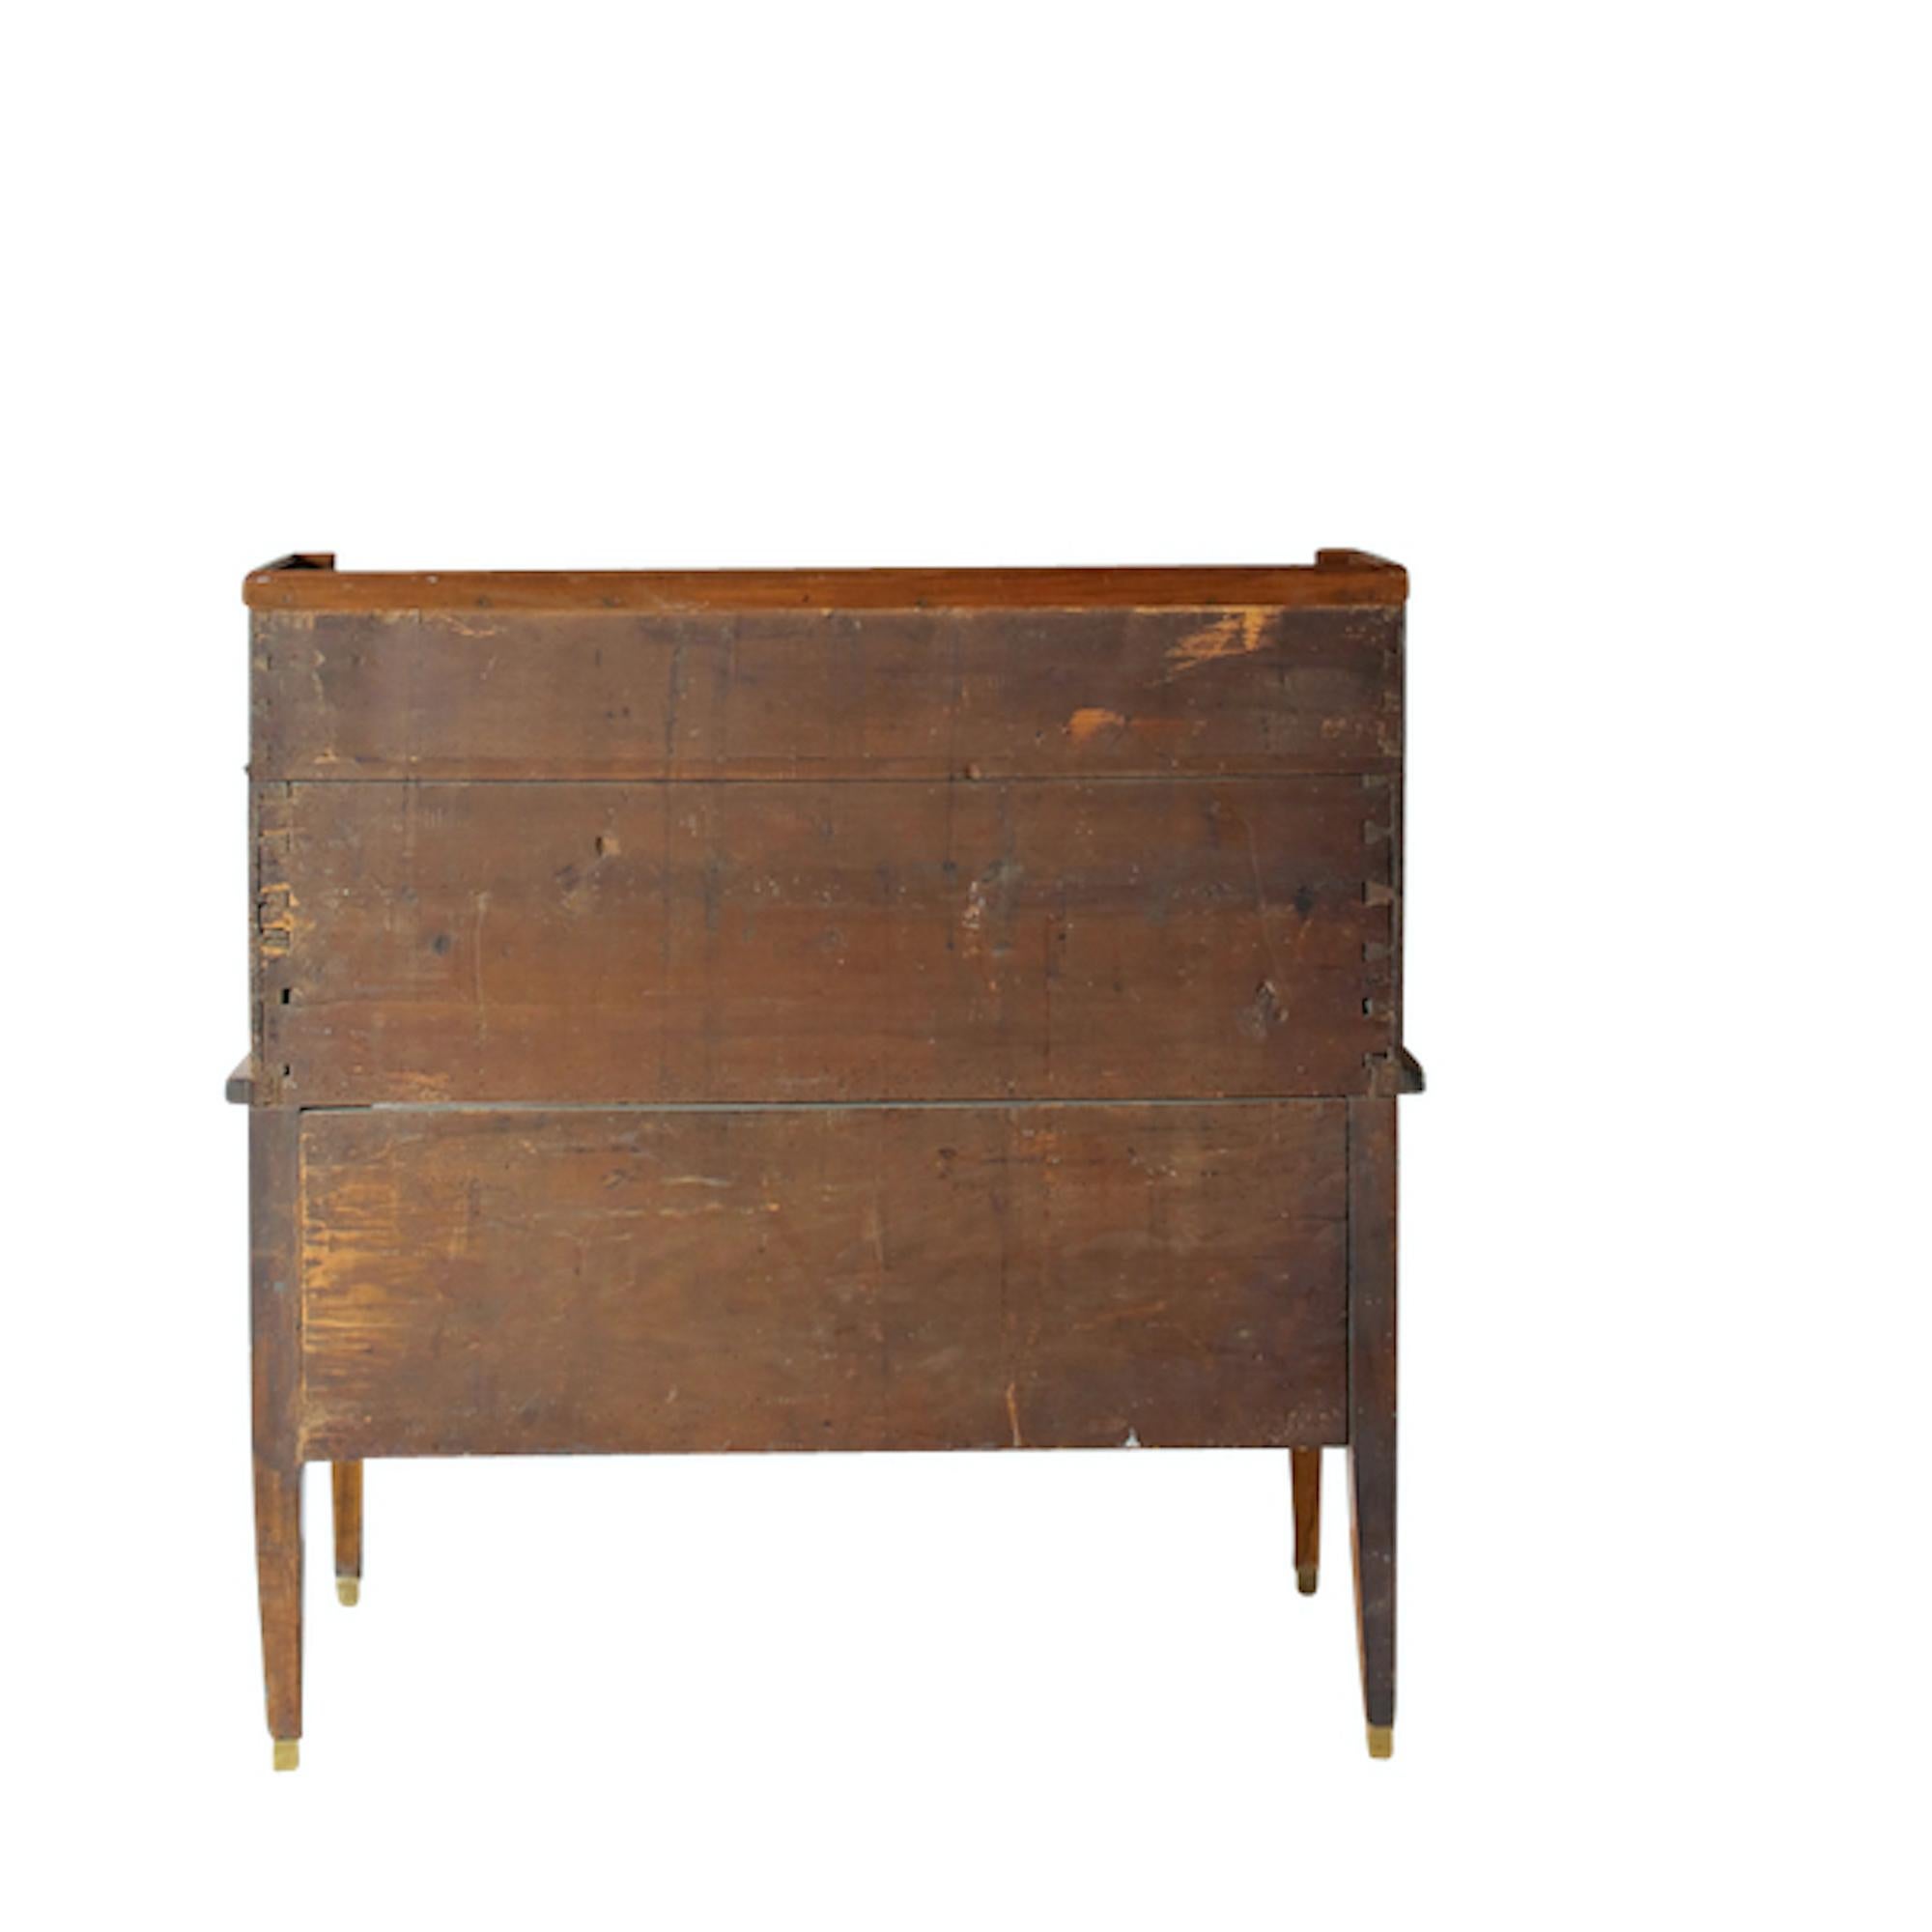 A 19th Century Directoire Period Walnut Cylinder Roll Top Writing Desk In Good Condition For Sale In Toorak, VIC